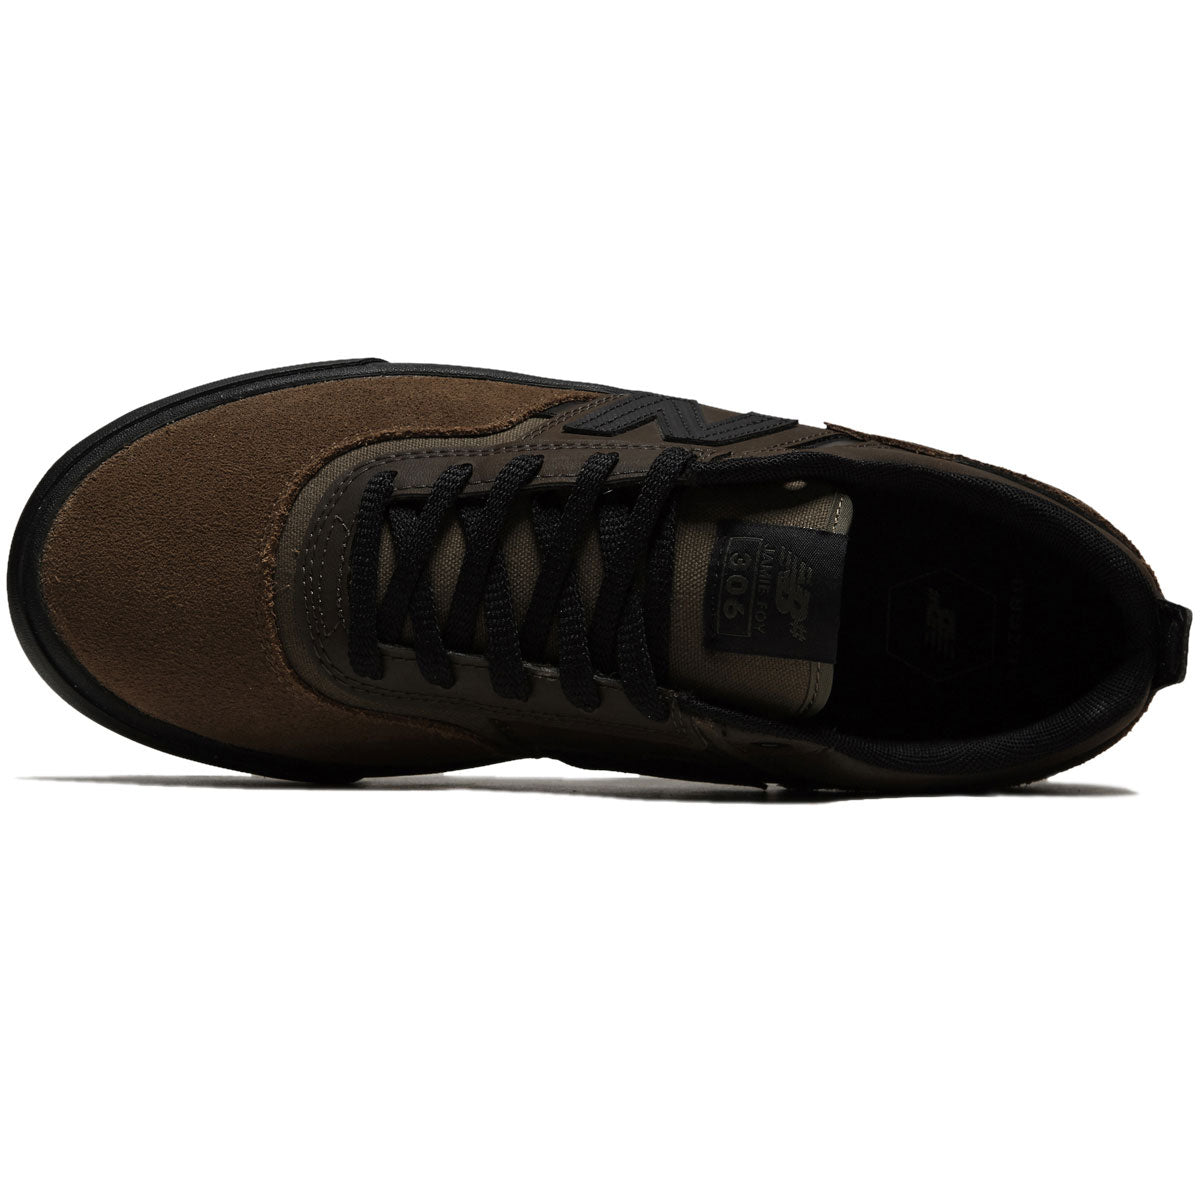 New Balance 306 Foy Shoes - Brown/Black image 3